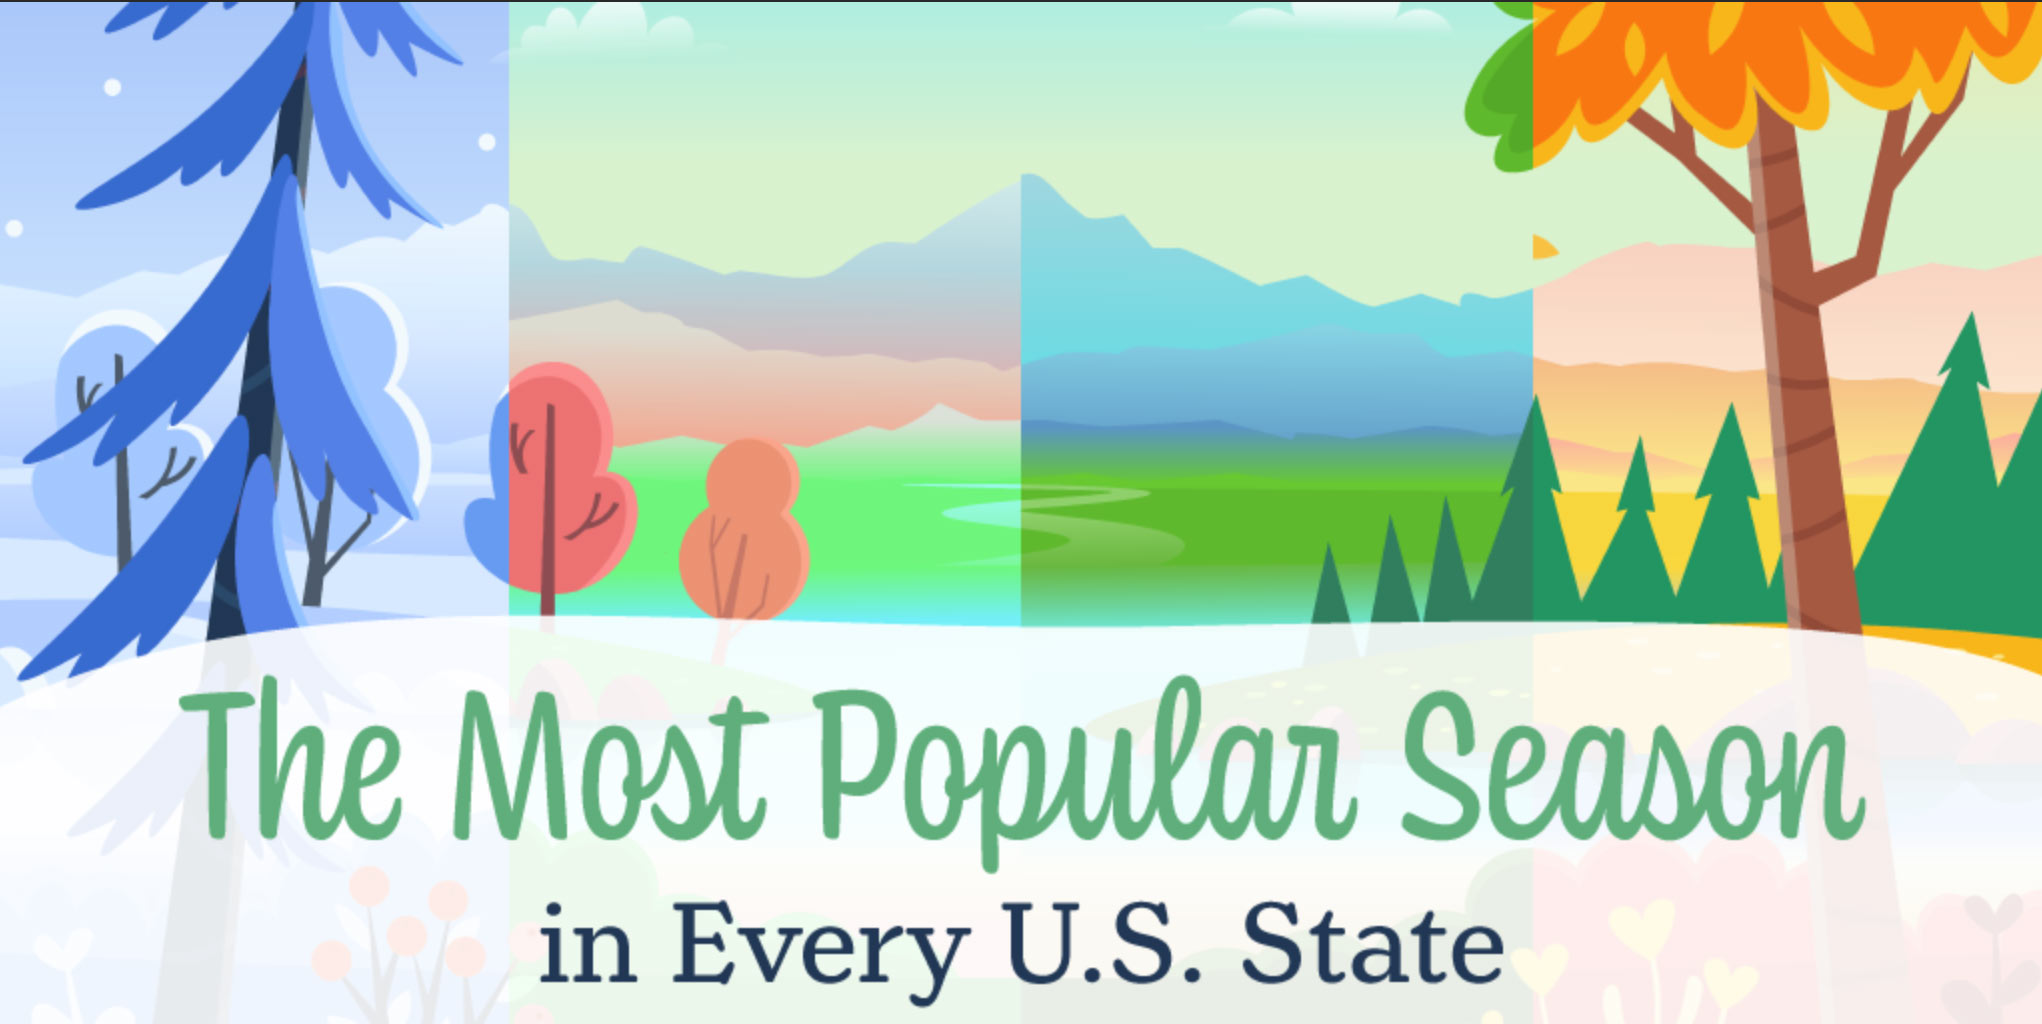 Most Popular Season in Every U.S. State